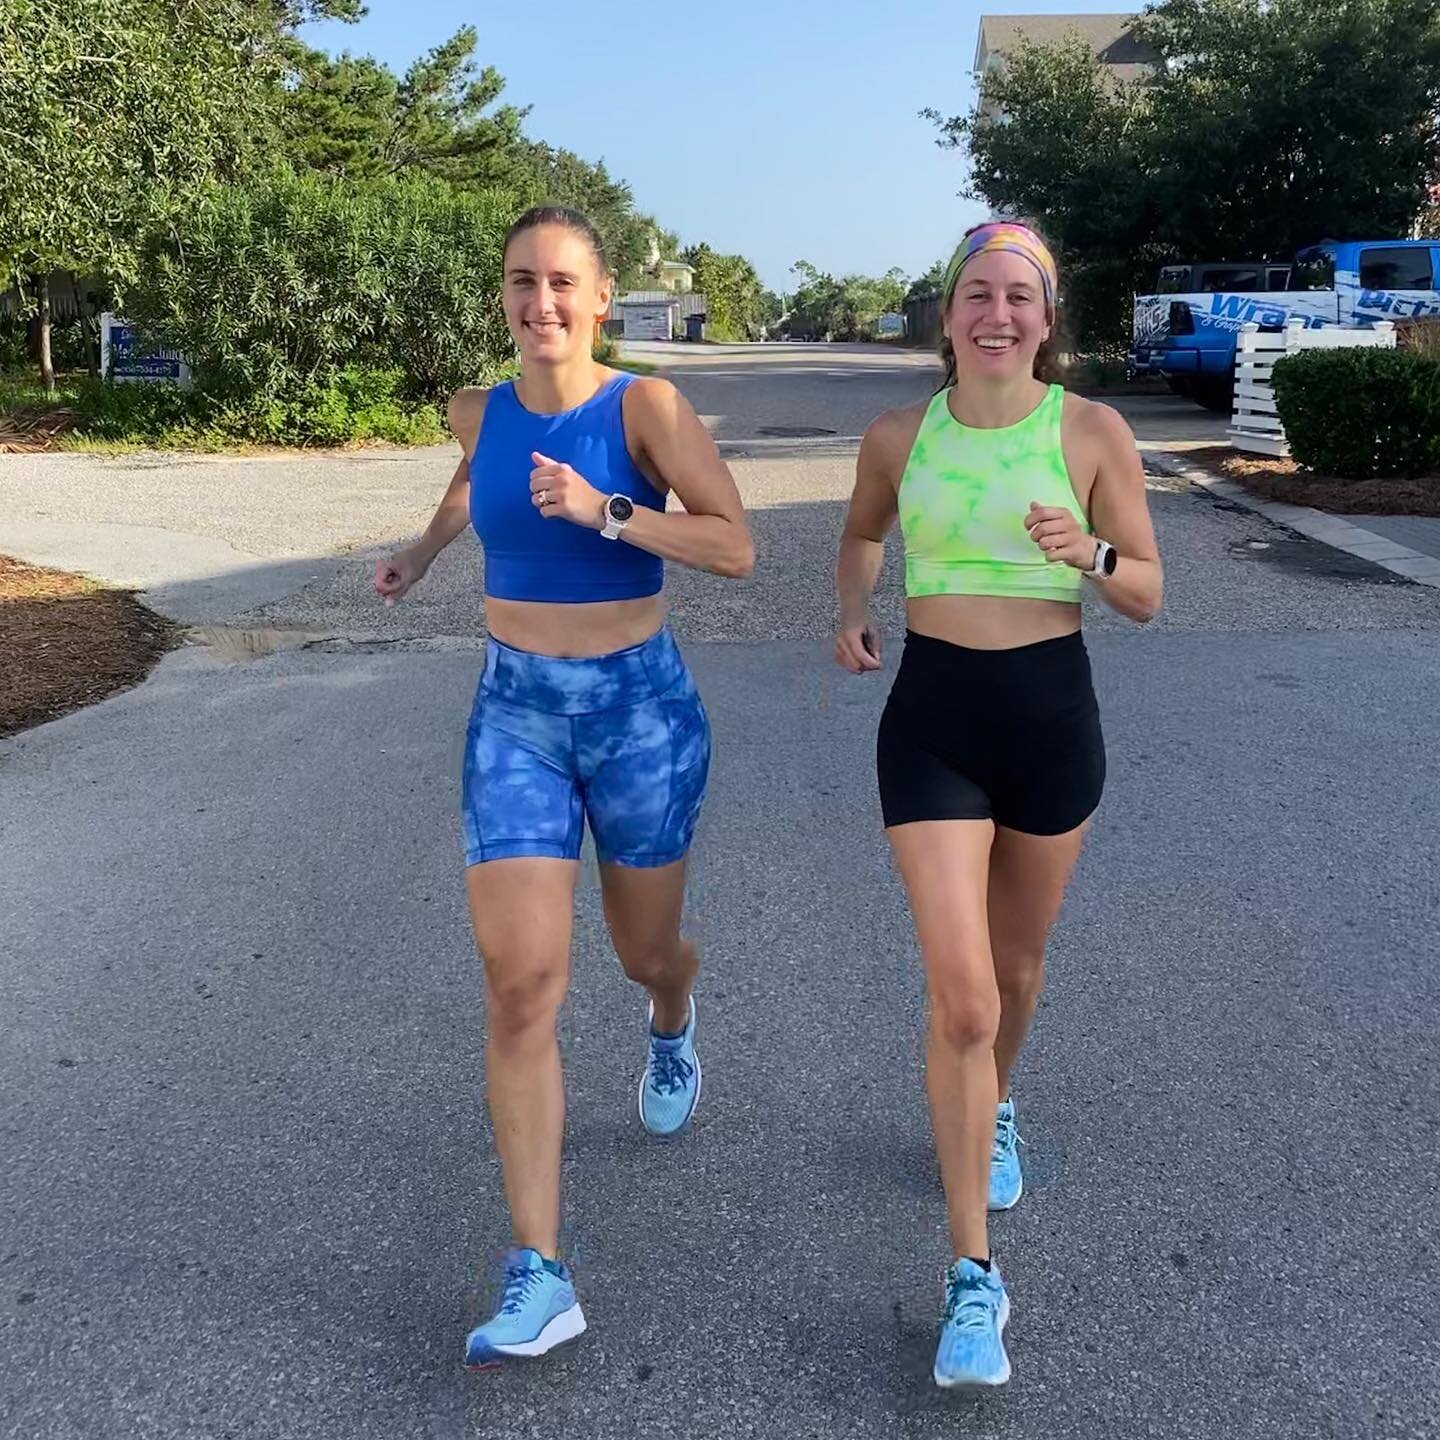 Annual Labor Day Shenanigans down in the gulf. Third year we hit up the gulf coast, new spot this time in Santa Rosa beach. ⁣
⁣
Beautiful, flat running route. Got out early and almost beat the heat. Not bringing water was a mistake, but we ran a nice